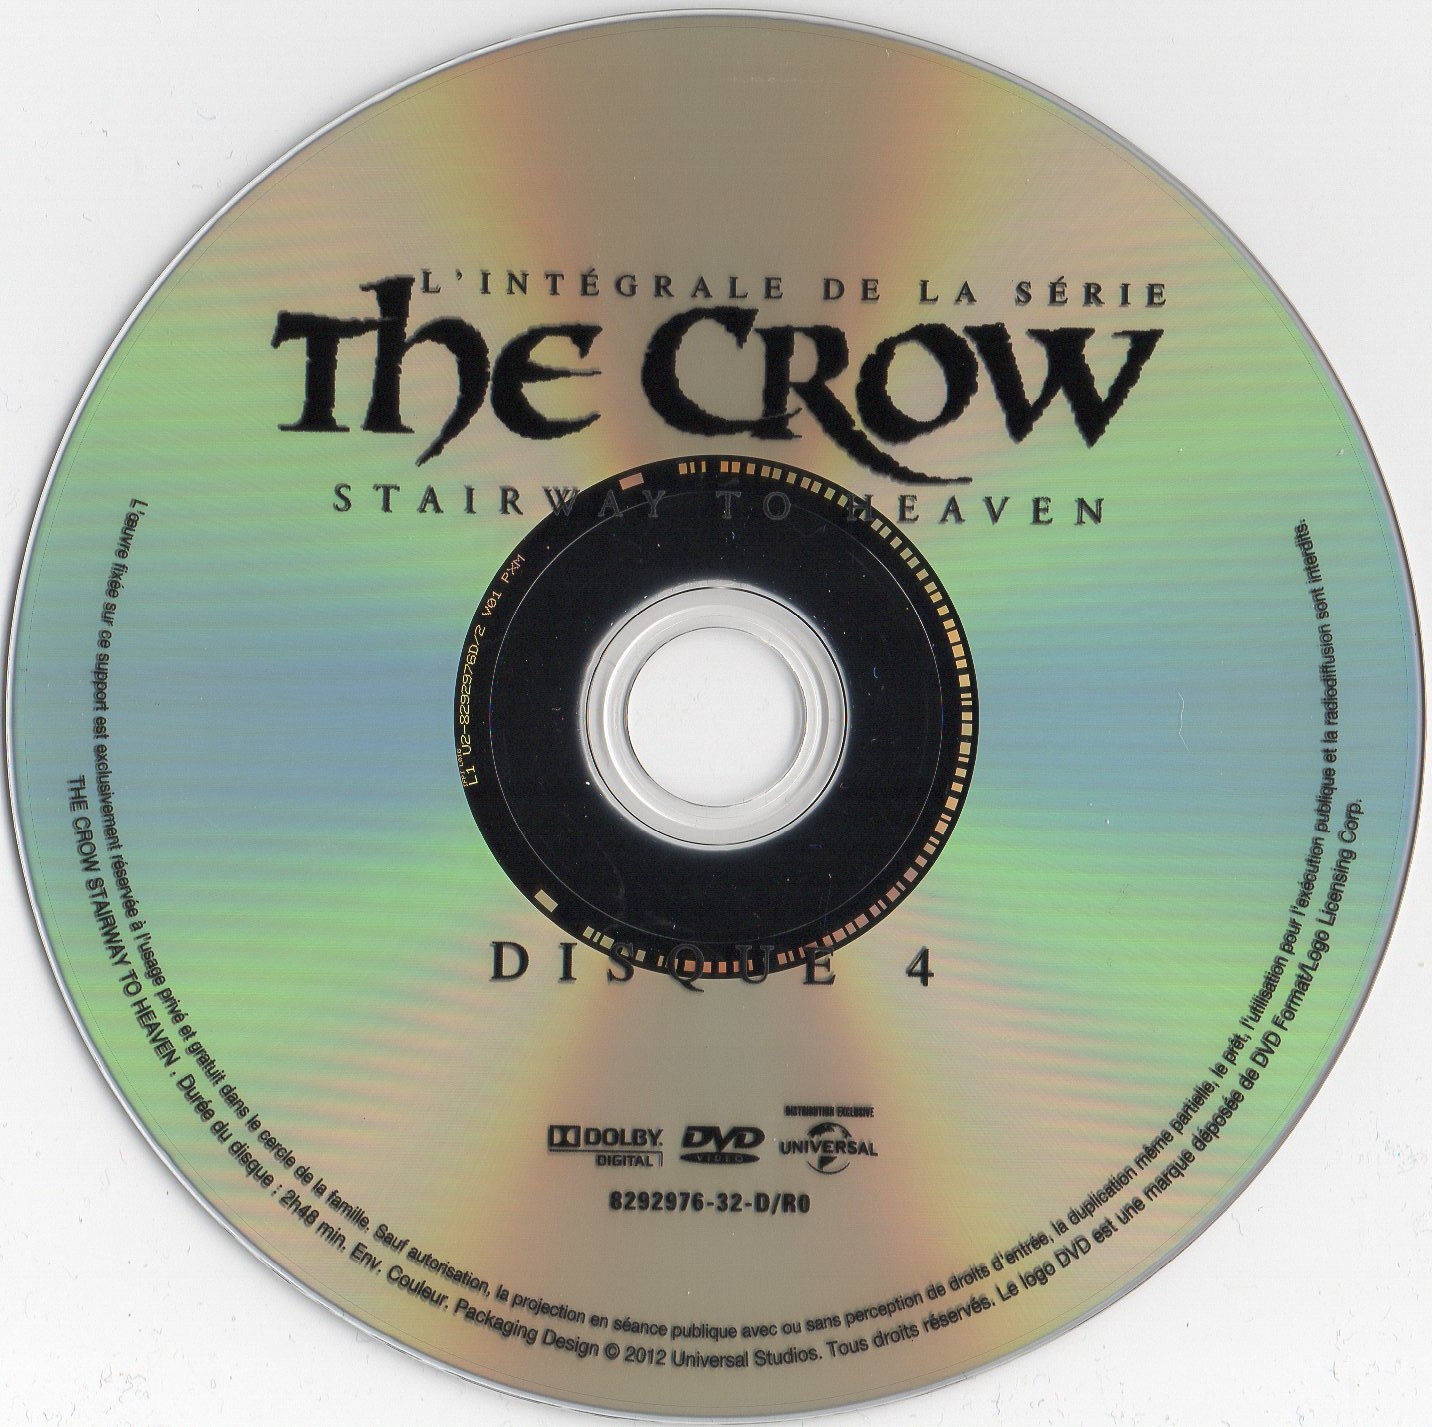 The crow stairway to heaven DISC 4